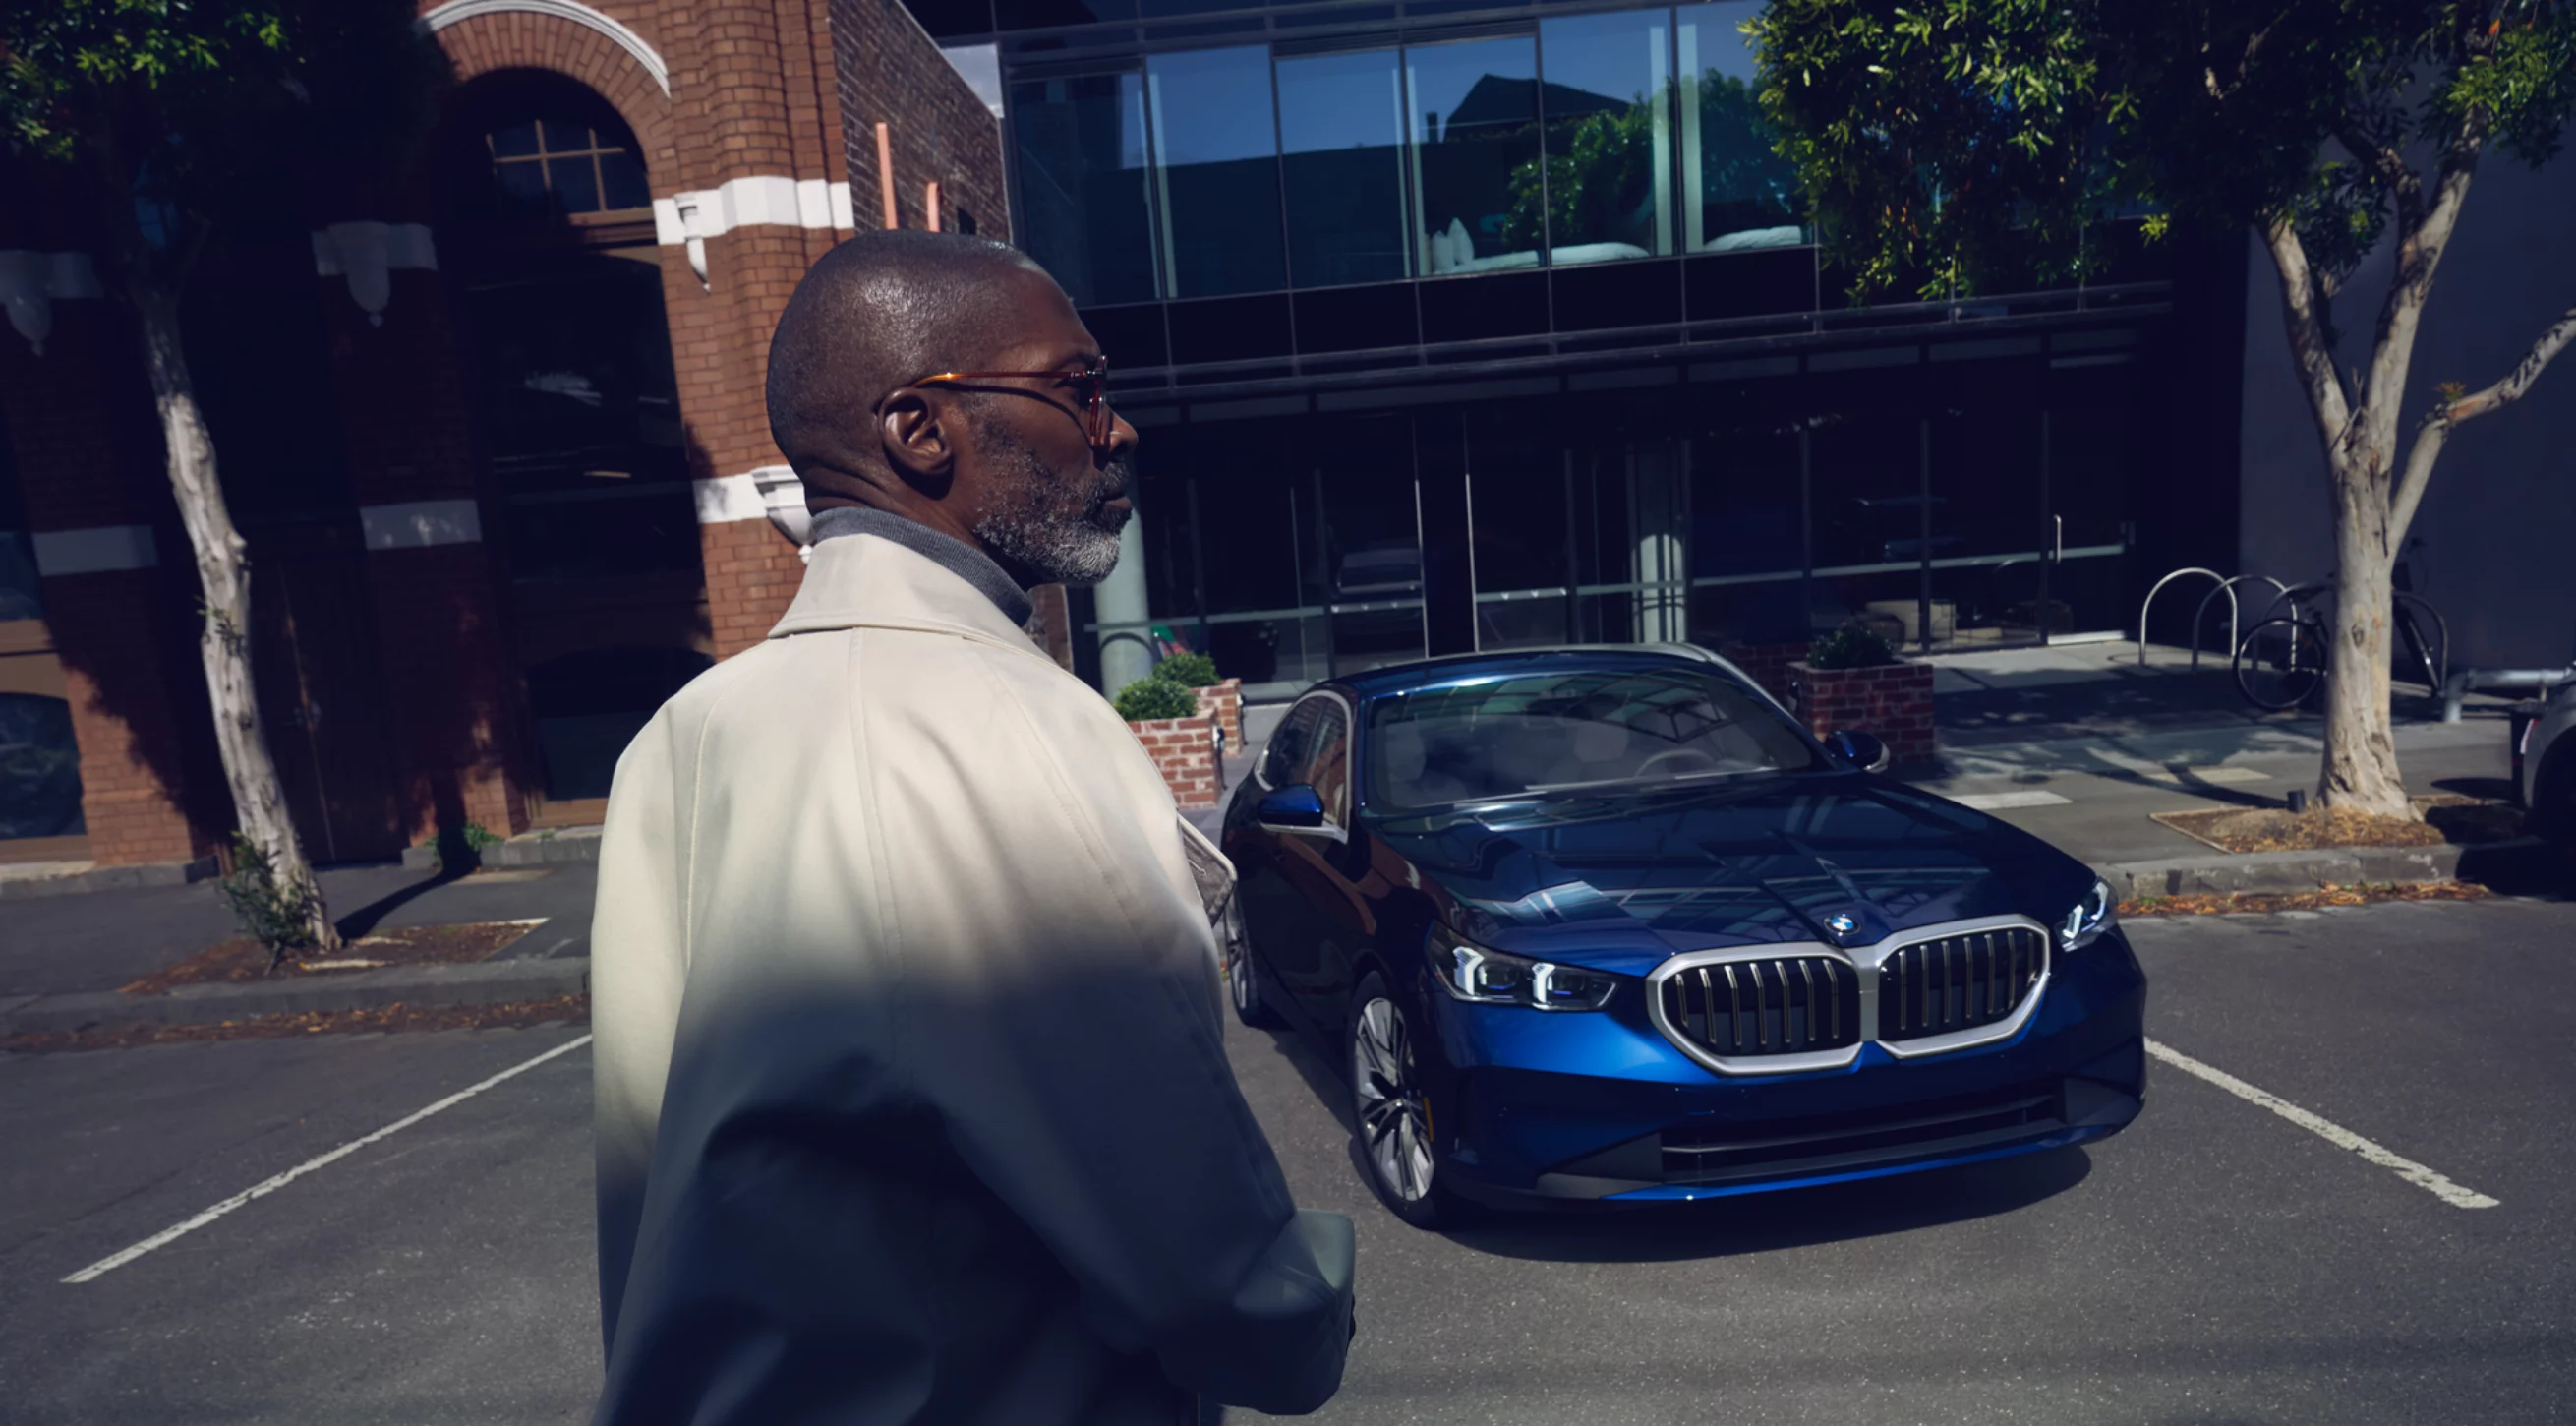 2024 BMW 5 Series in blue parked in front of building with man in foreground.